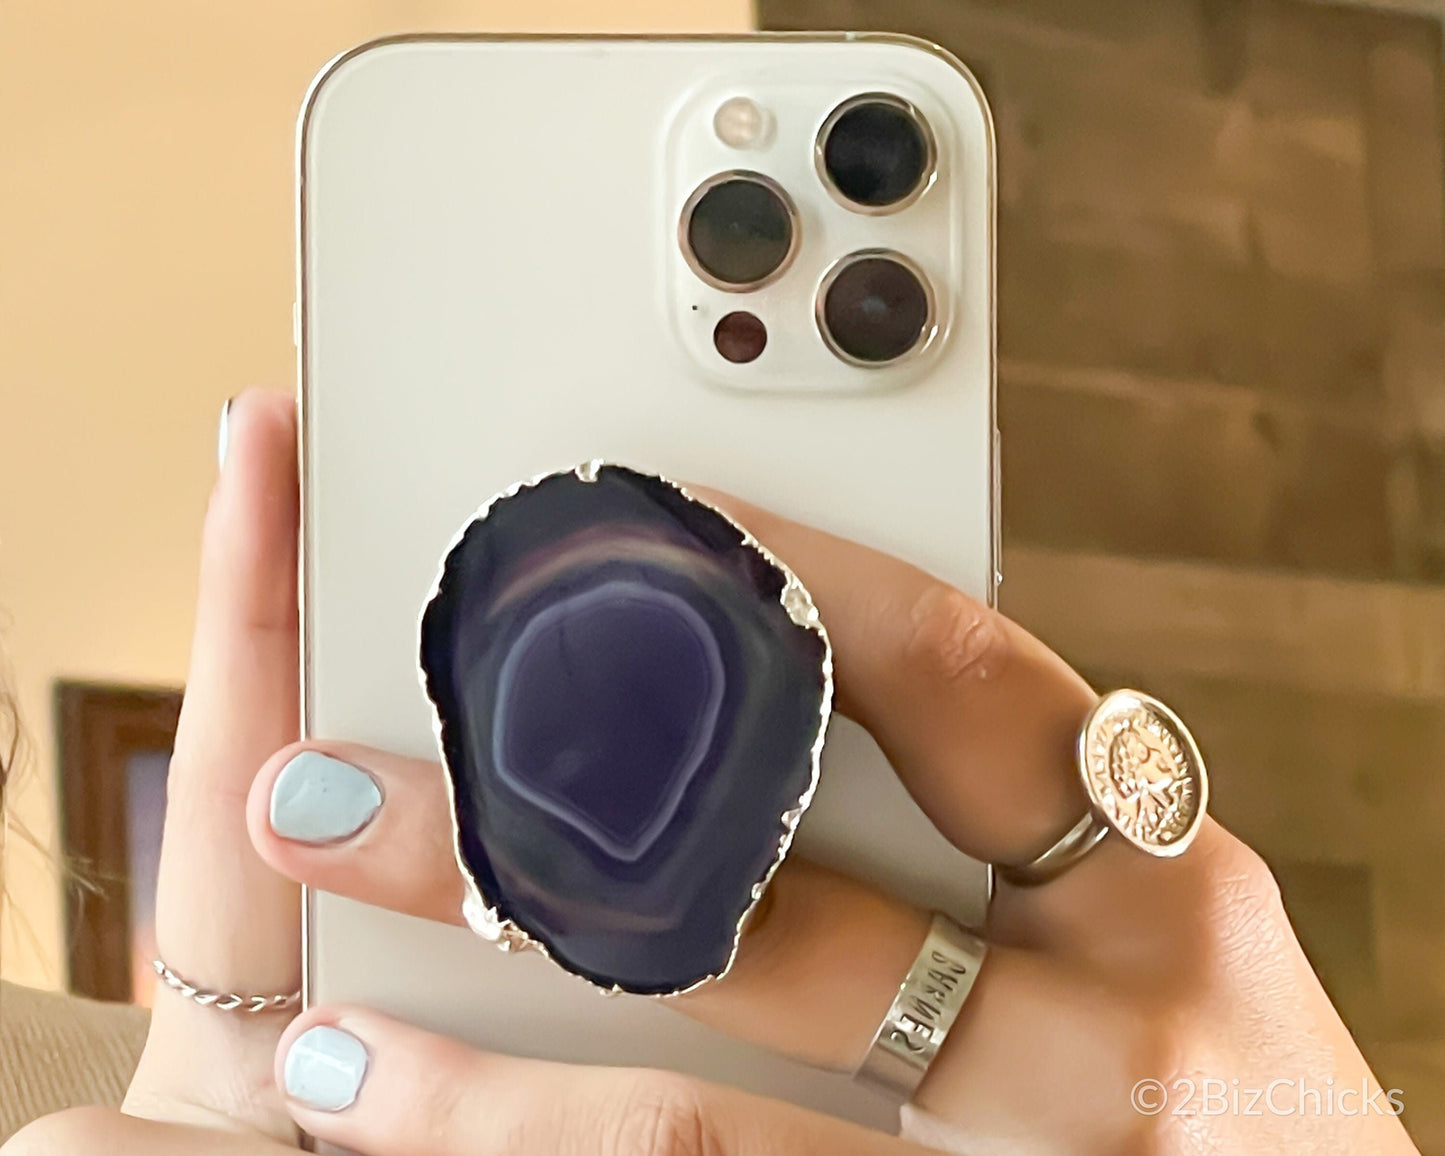 Silver Plated Agate Phone Grip